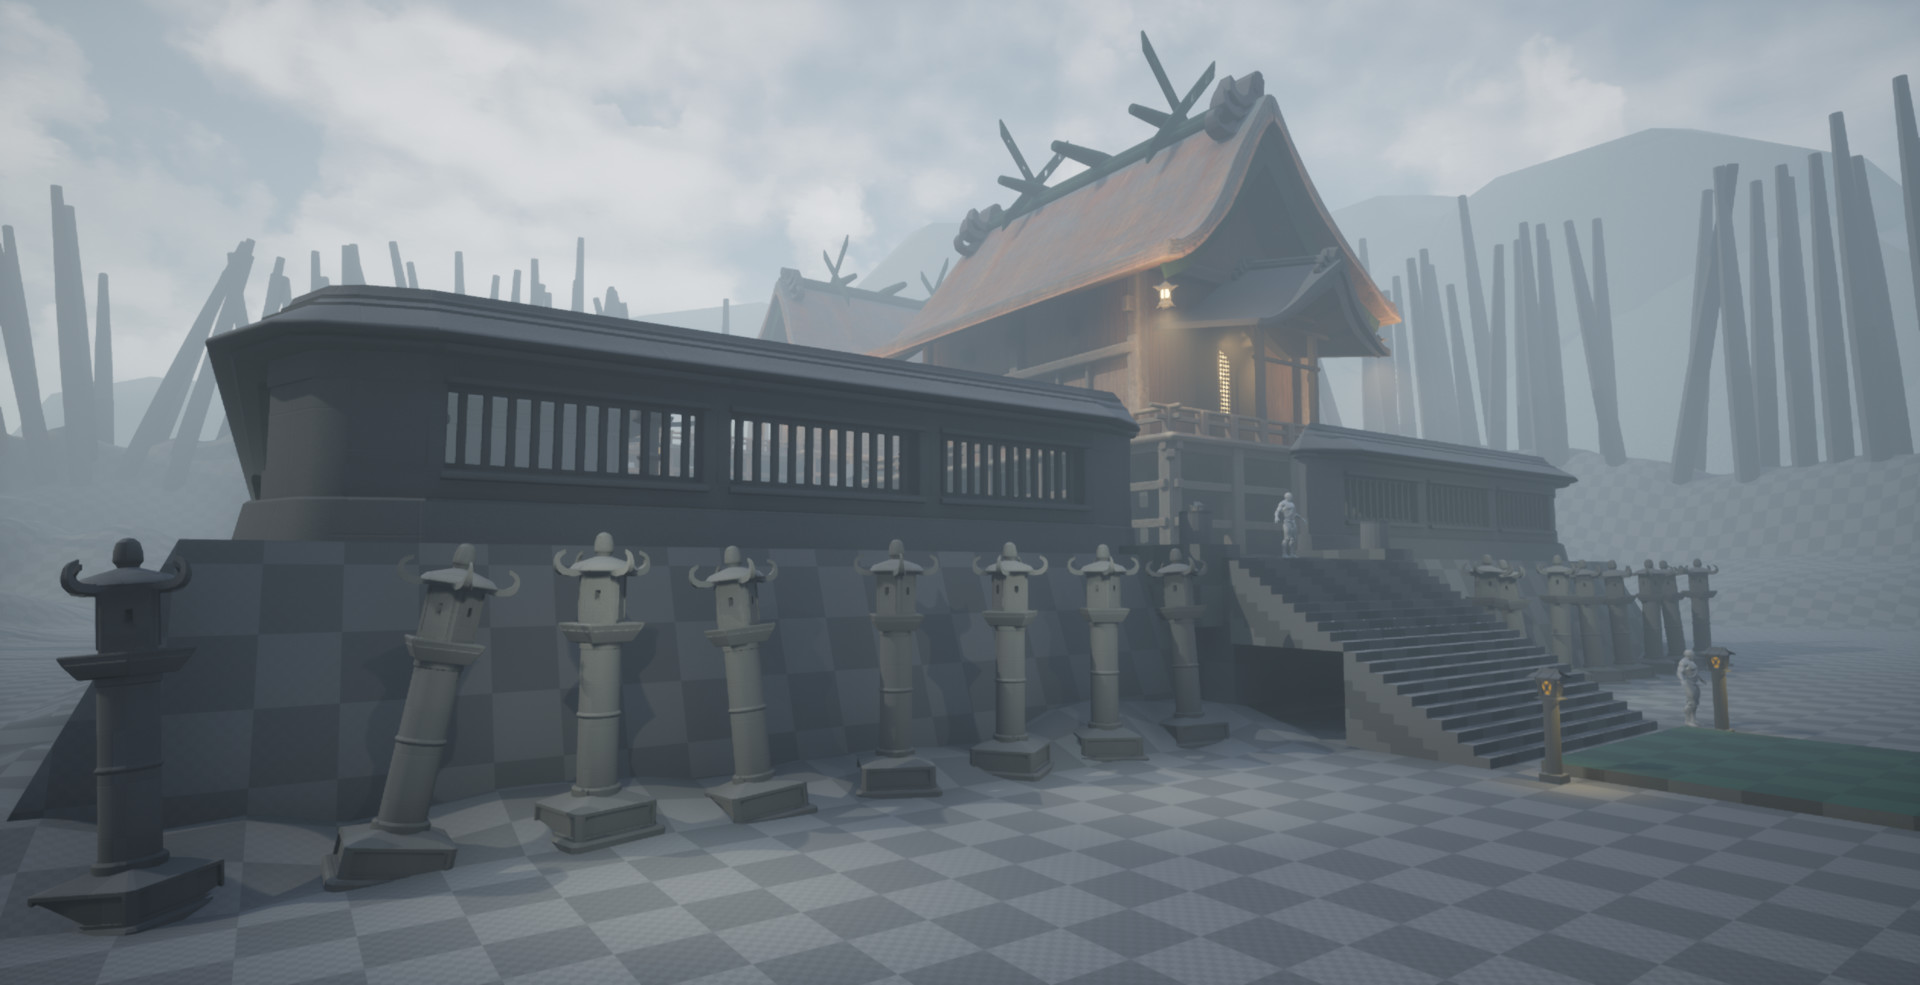 Low ground camera shot from Unreal 4. Close to the front are lots of stone shrine lanterns. Steps take one upwards towards the main layout of the whole place. Part of a building is seen with its wooden balcony and supports lit in oranges through hanging lanterns. In the background where the landscape ends, one can now observe large, lowpoly mountains range.